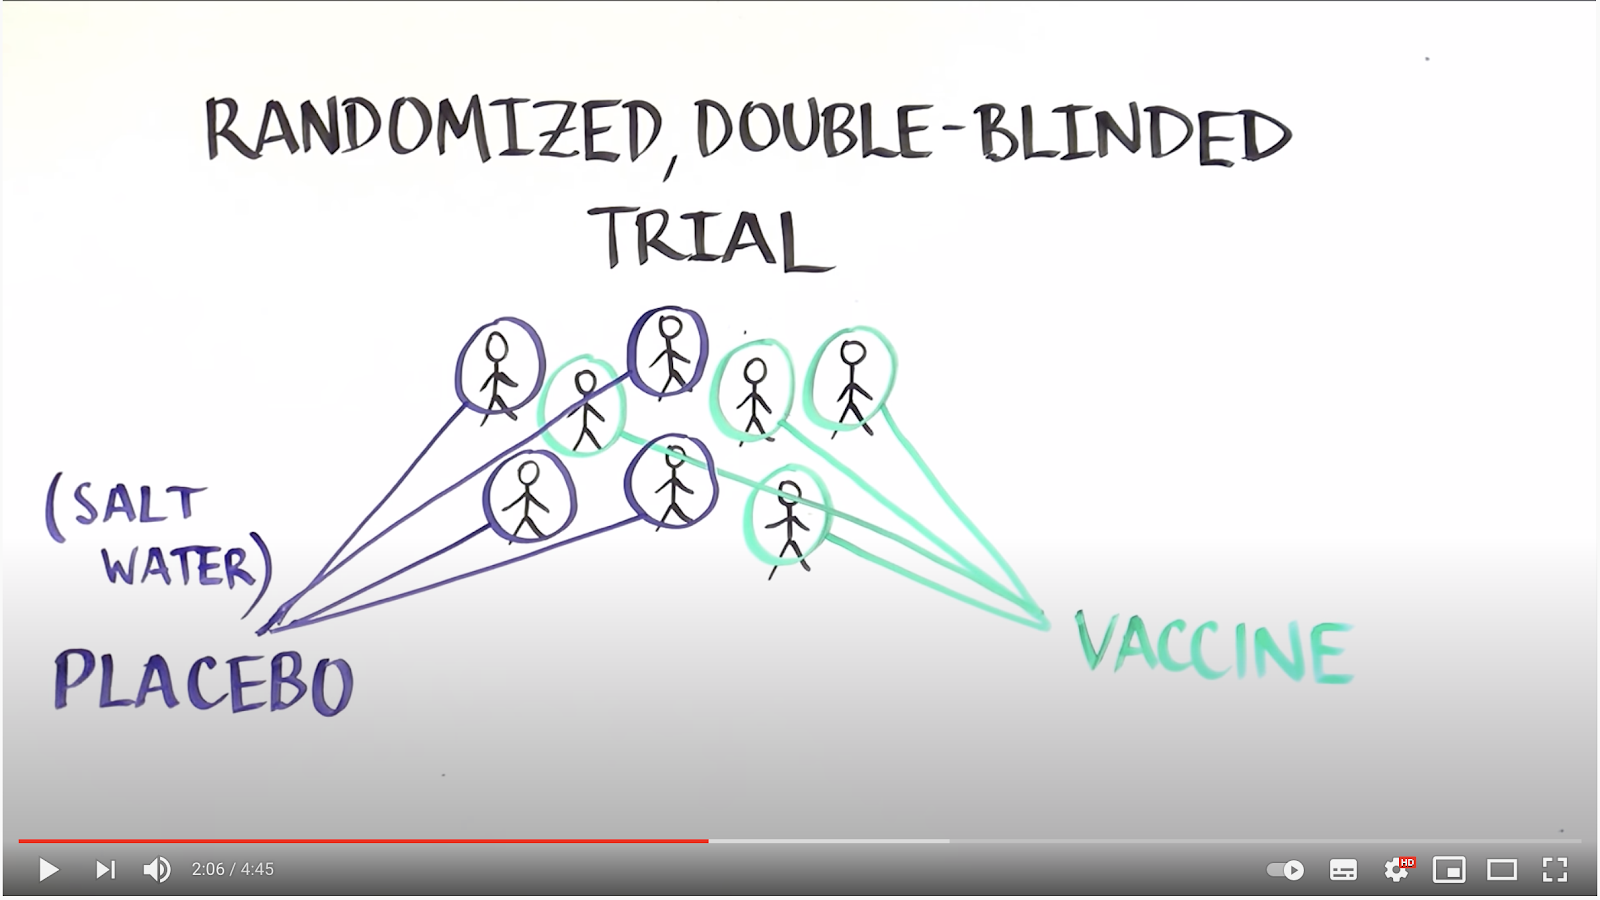 Clinical trials for COVID19 vaccines